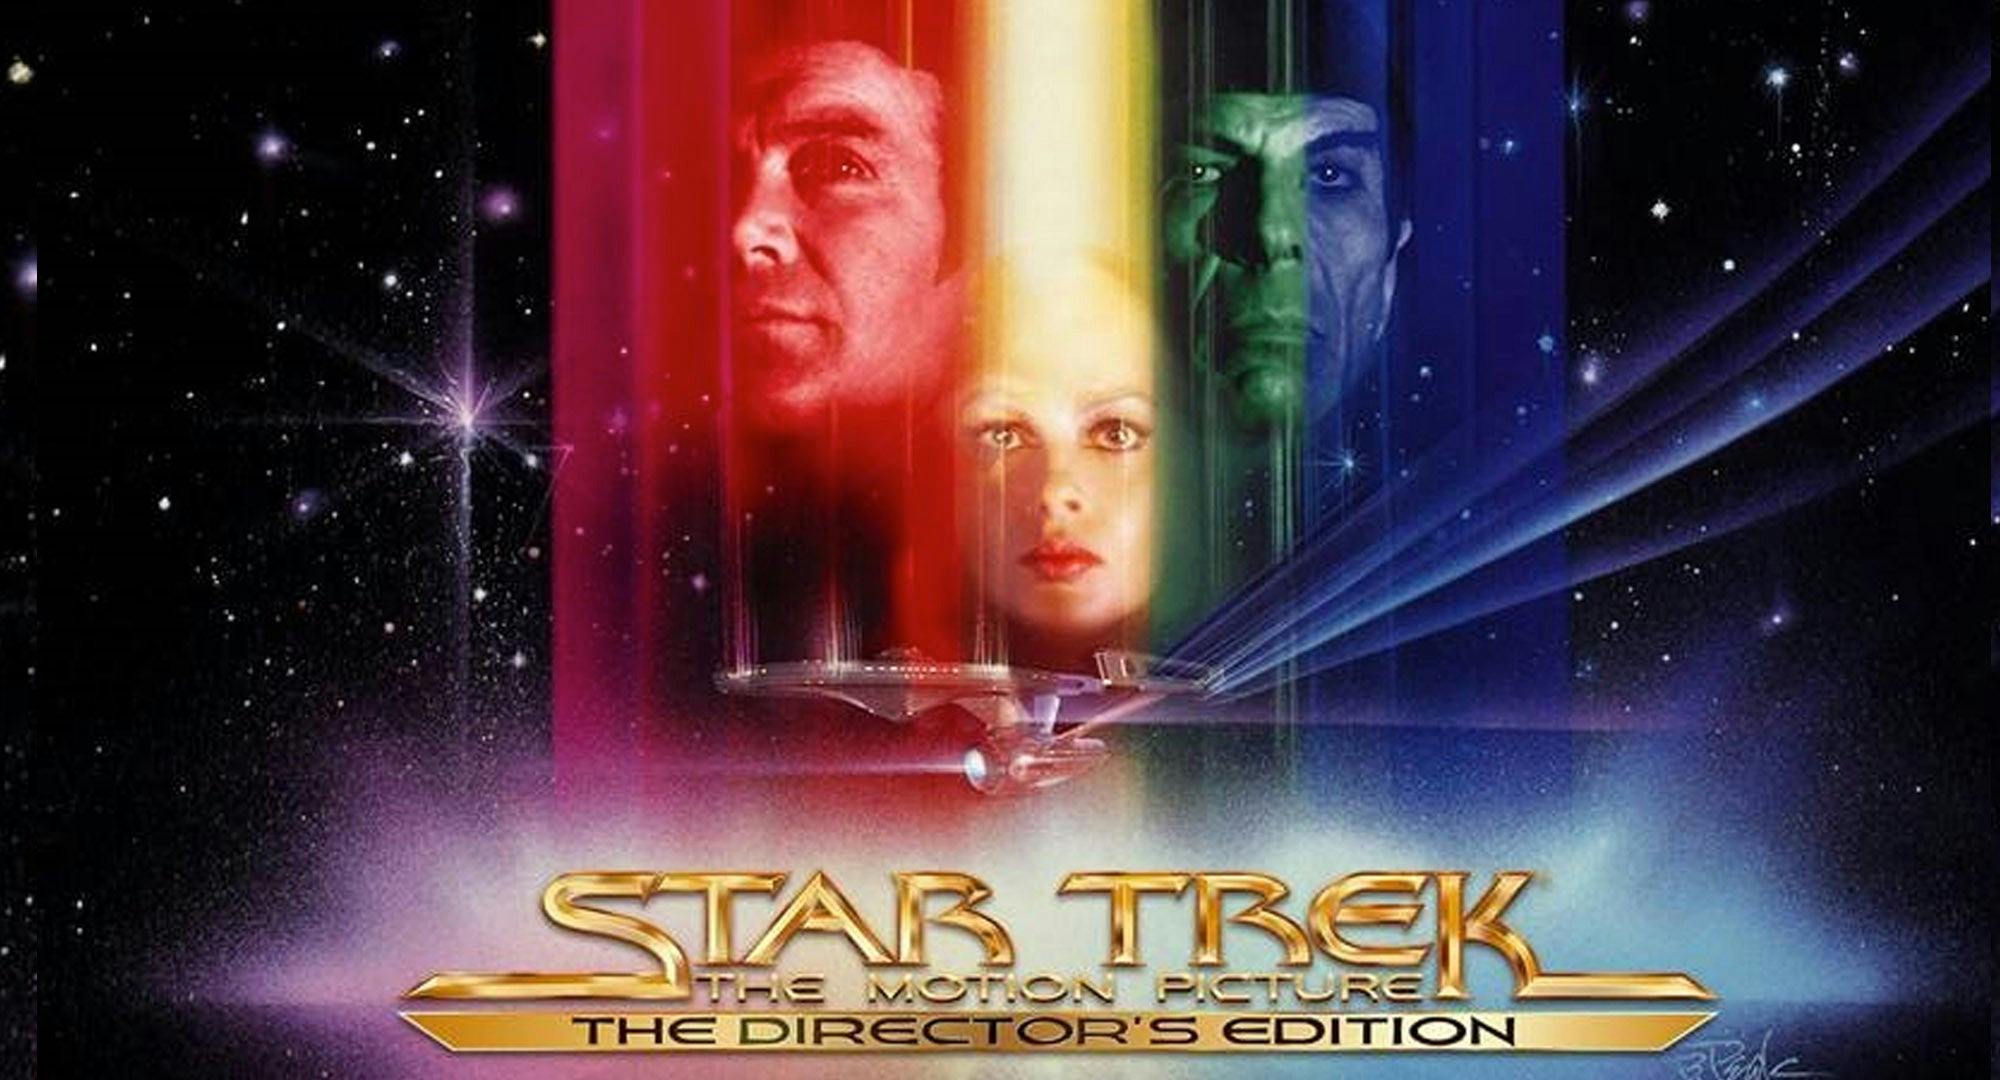 The One with Star Trek: The Motion Picture Director's Edition 4K